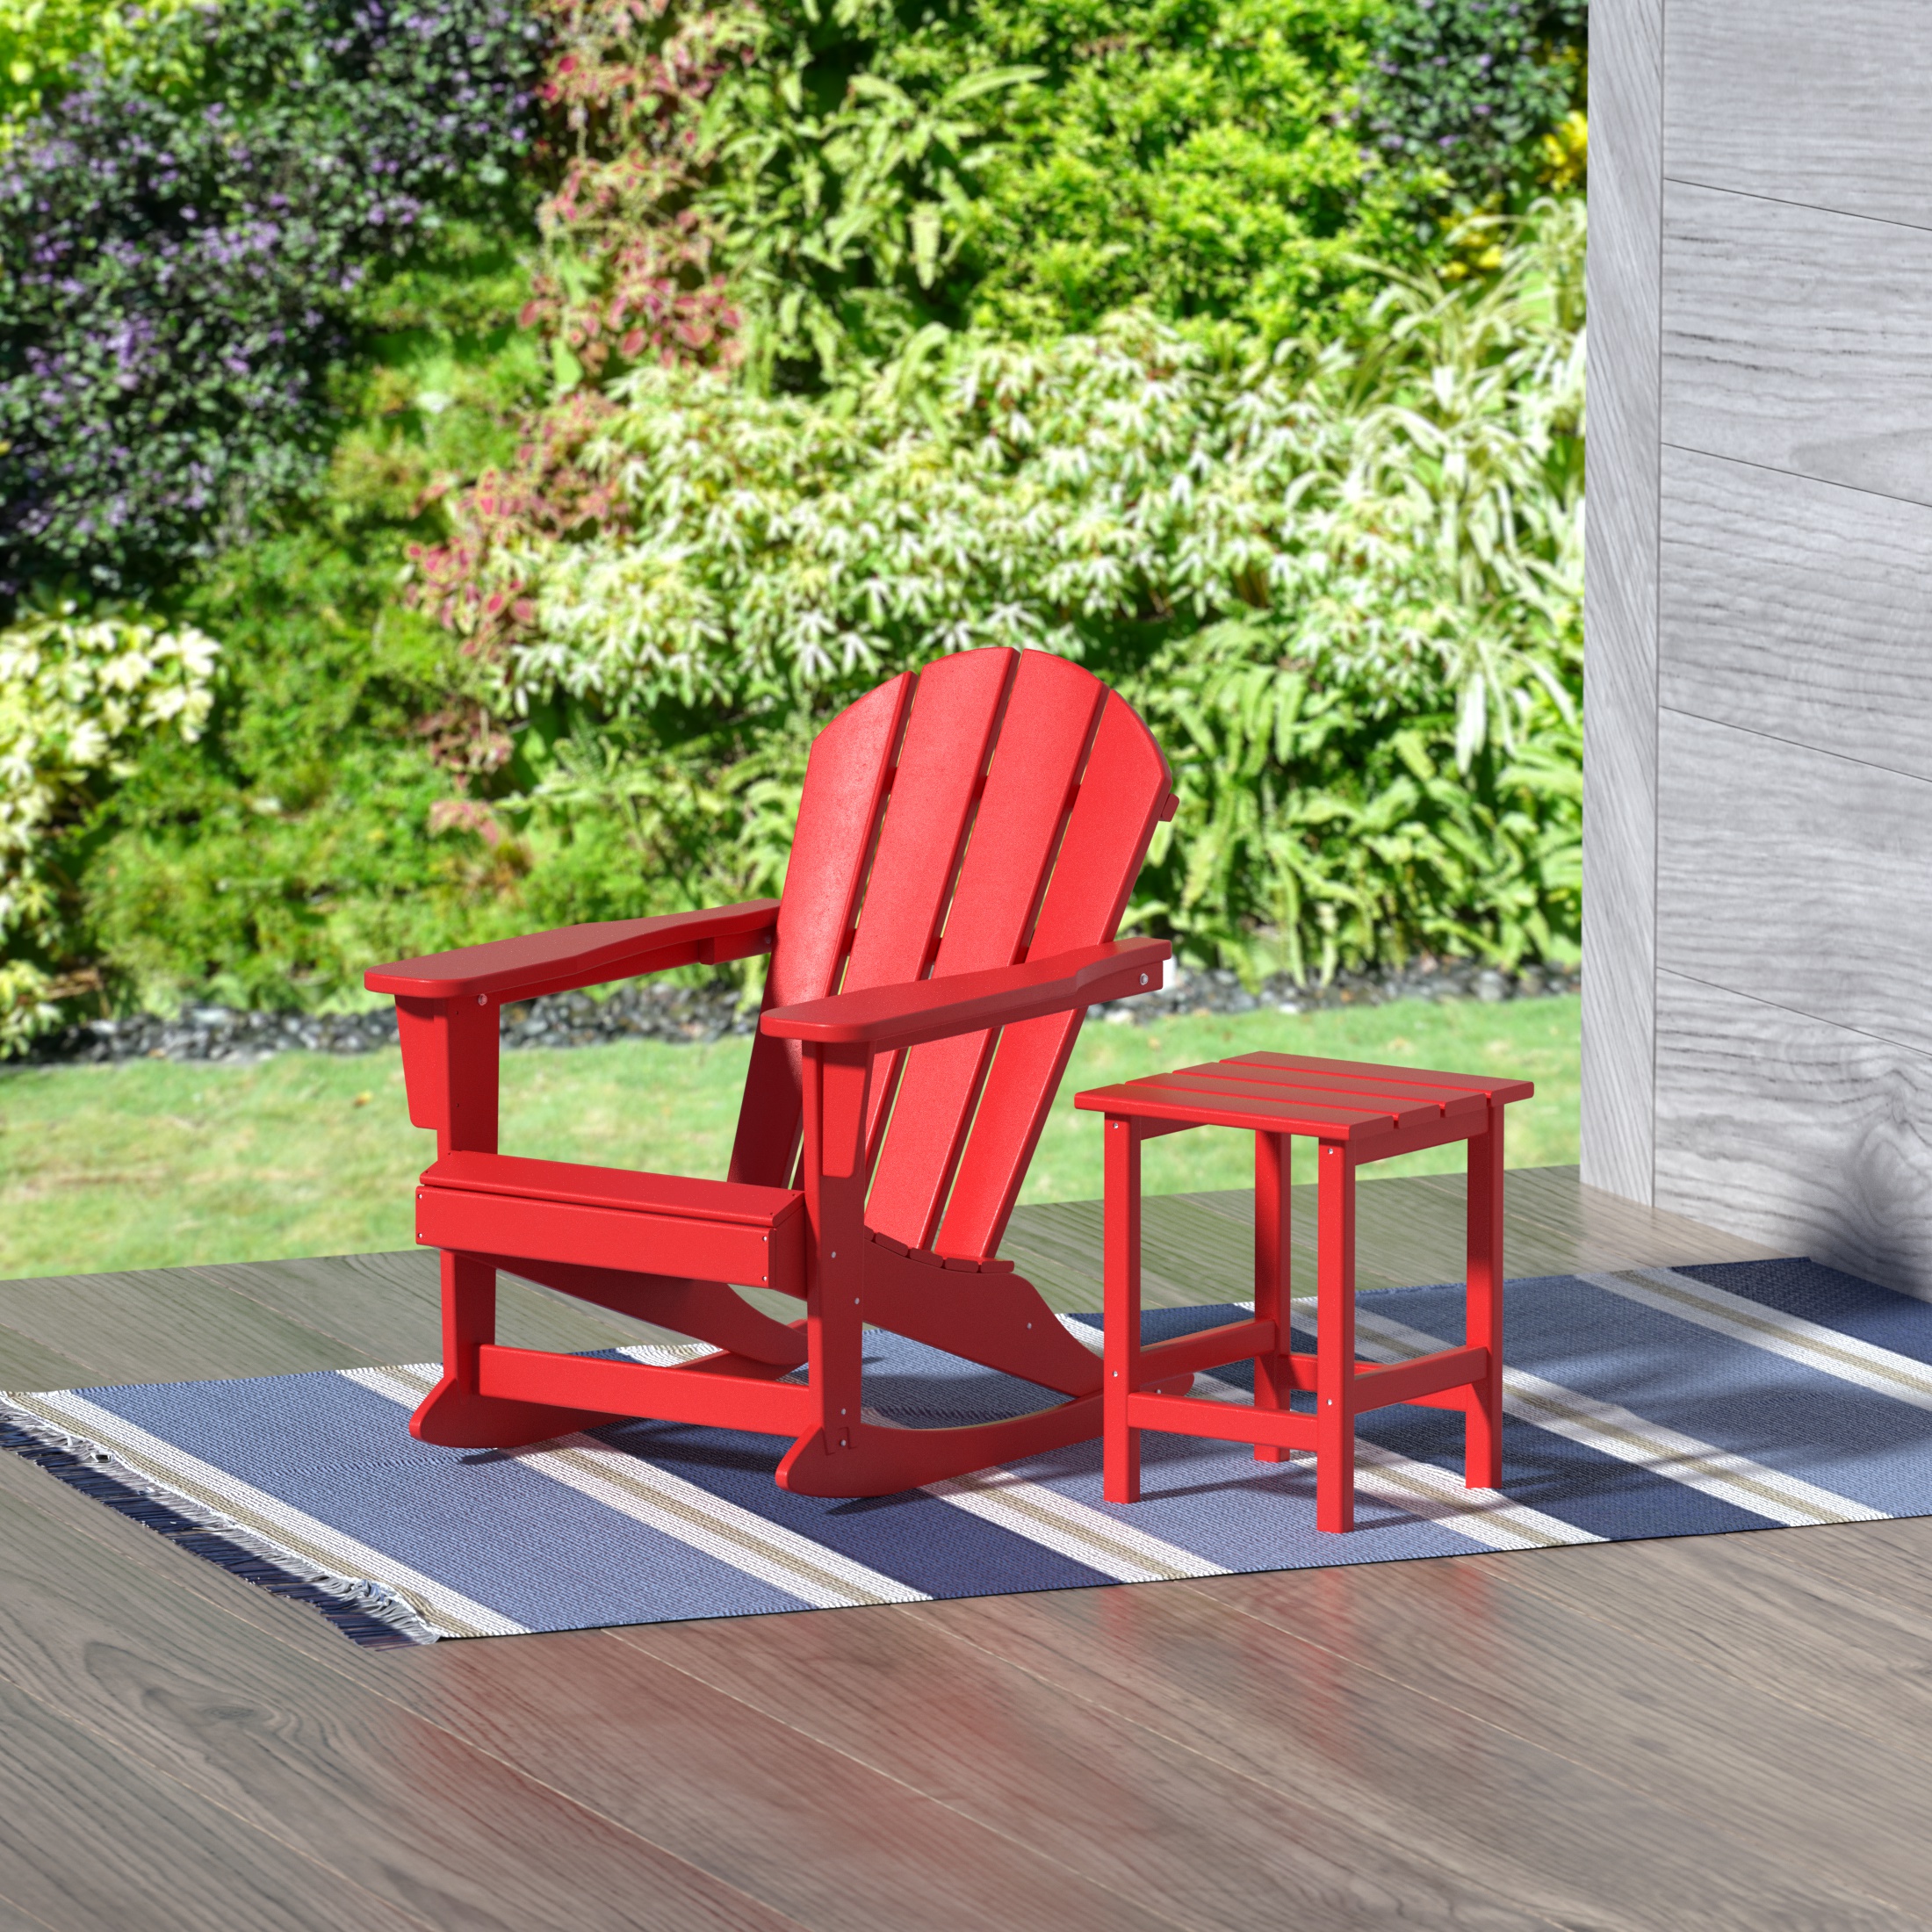 GARDEN 2-Piece Set Plastic Outdoor Rocking Chair with Square Side Table Included, Red - image 1 of 11